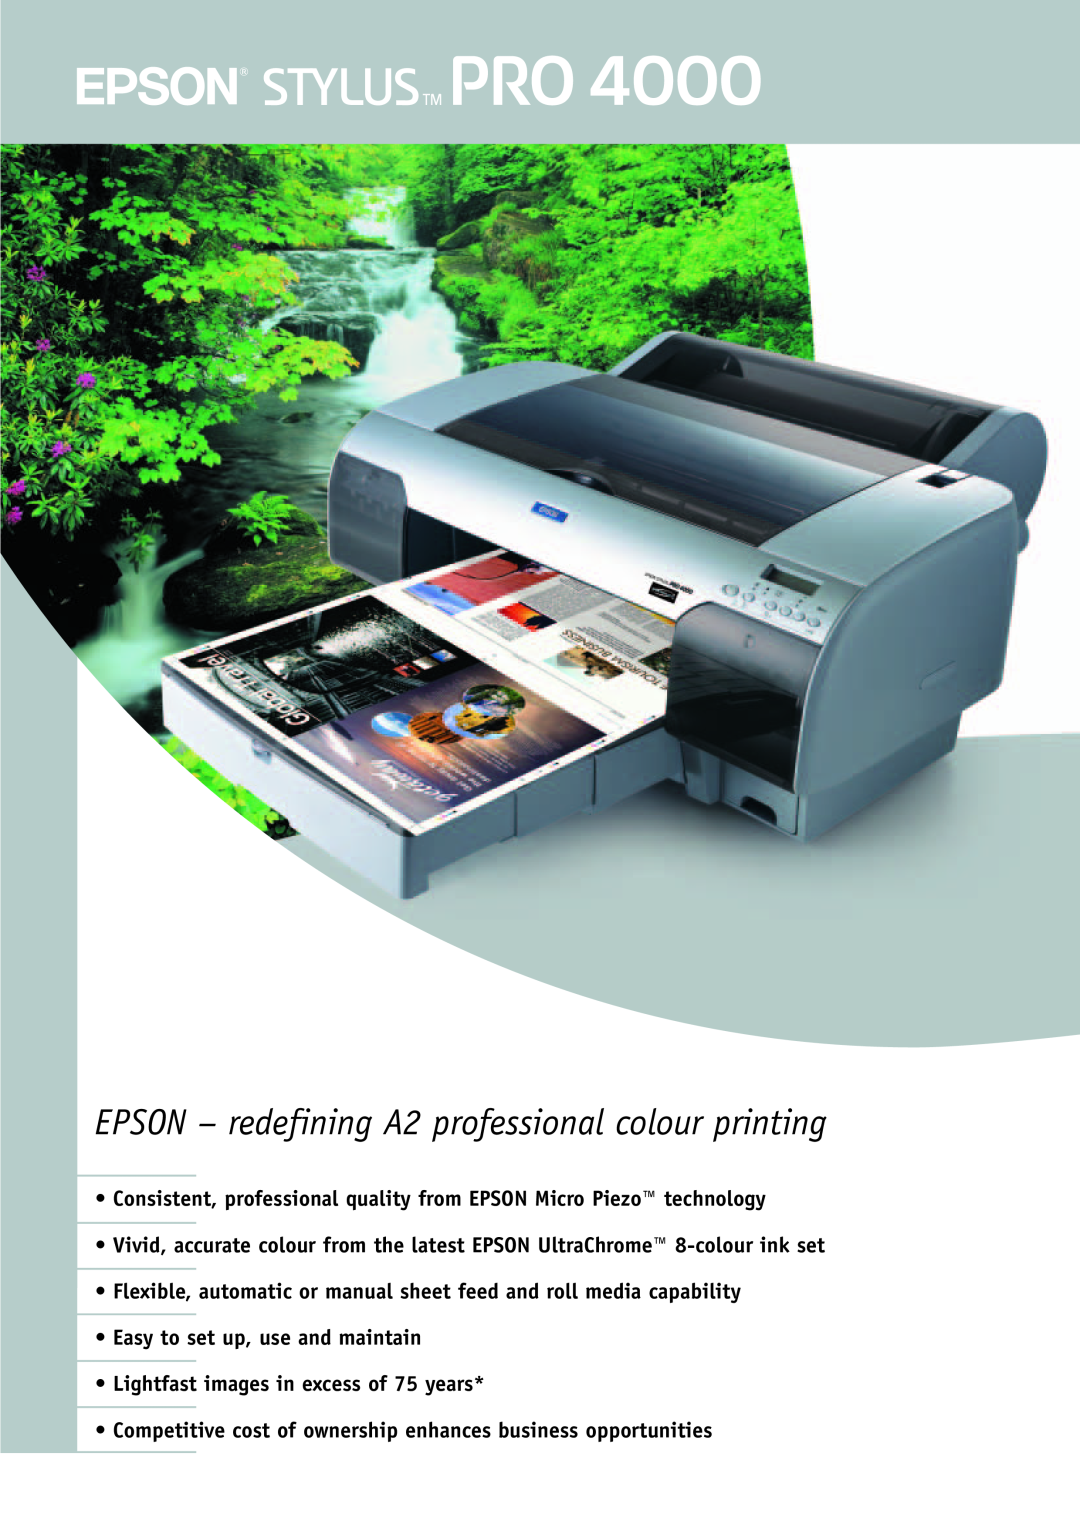 Epson Pro 4000 manual EPSON - redefining A2 professional colour printing, Easy to set up, use and maintain 